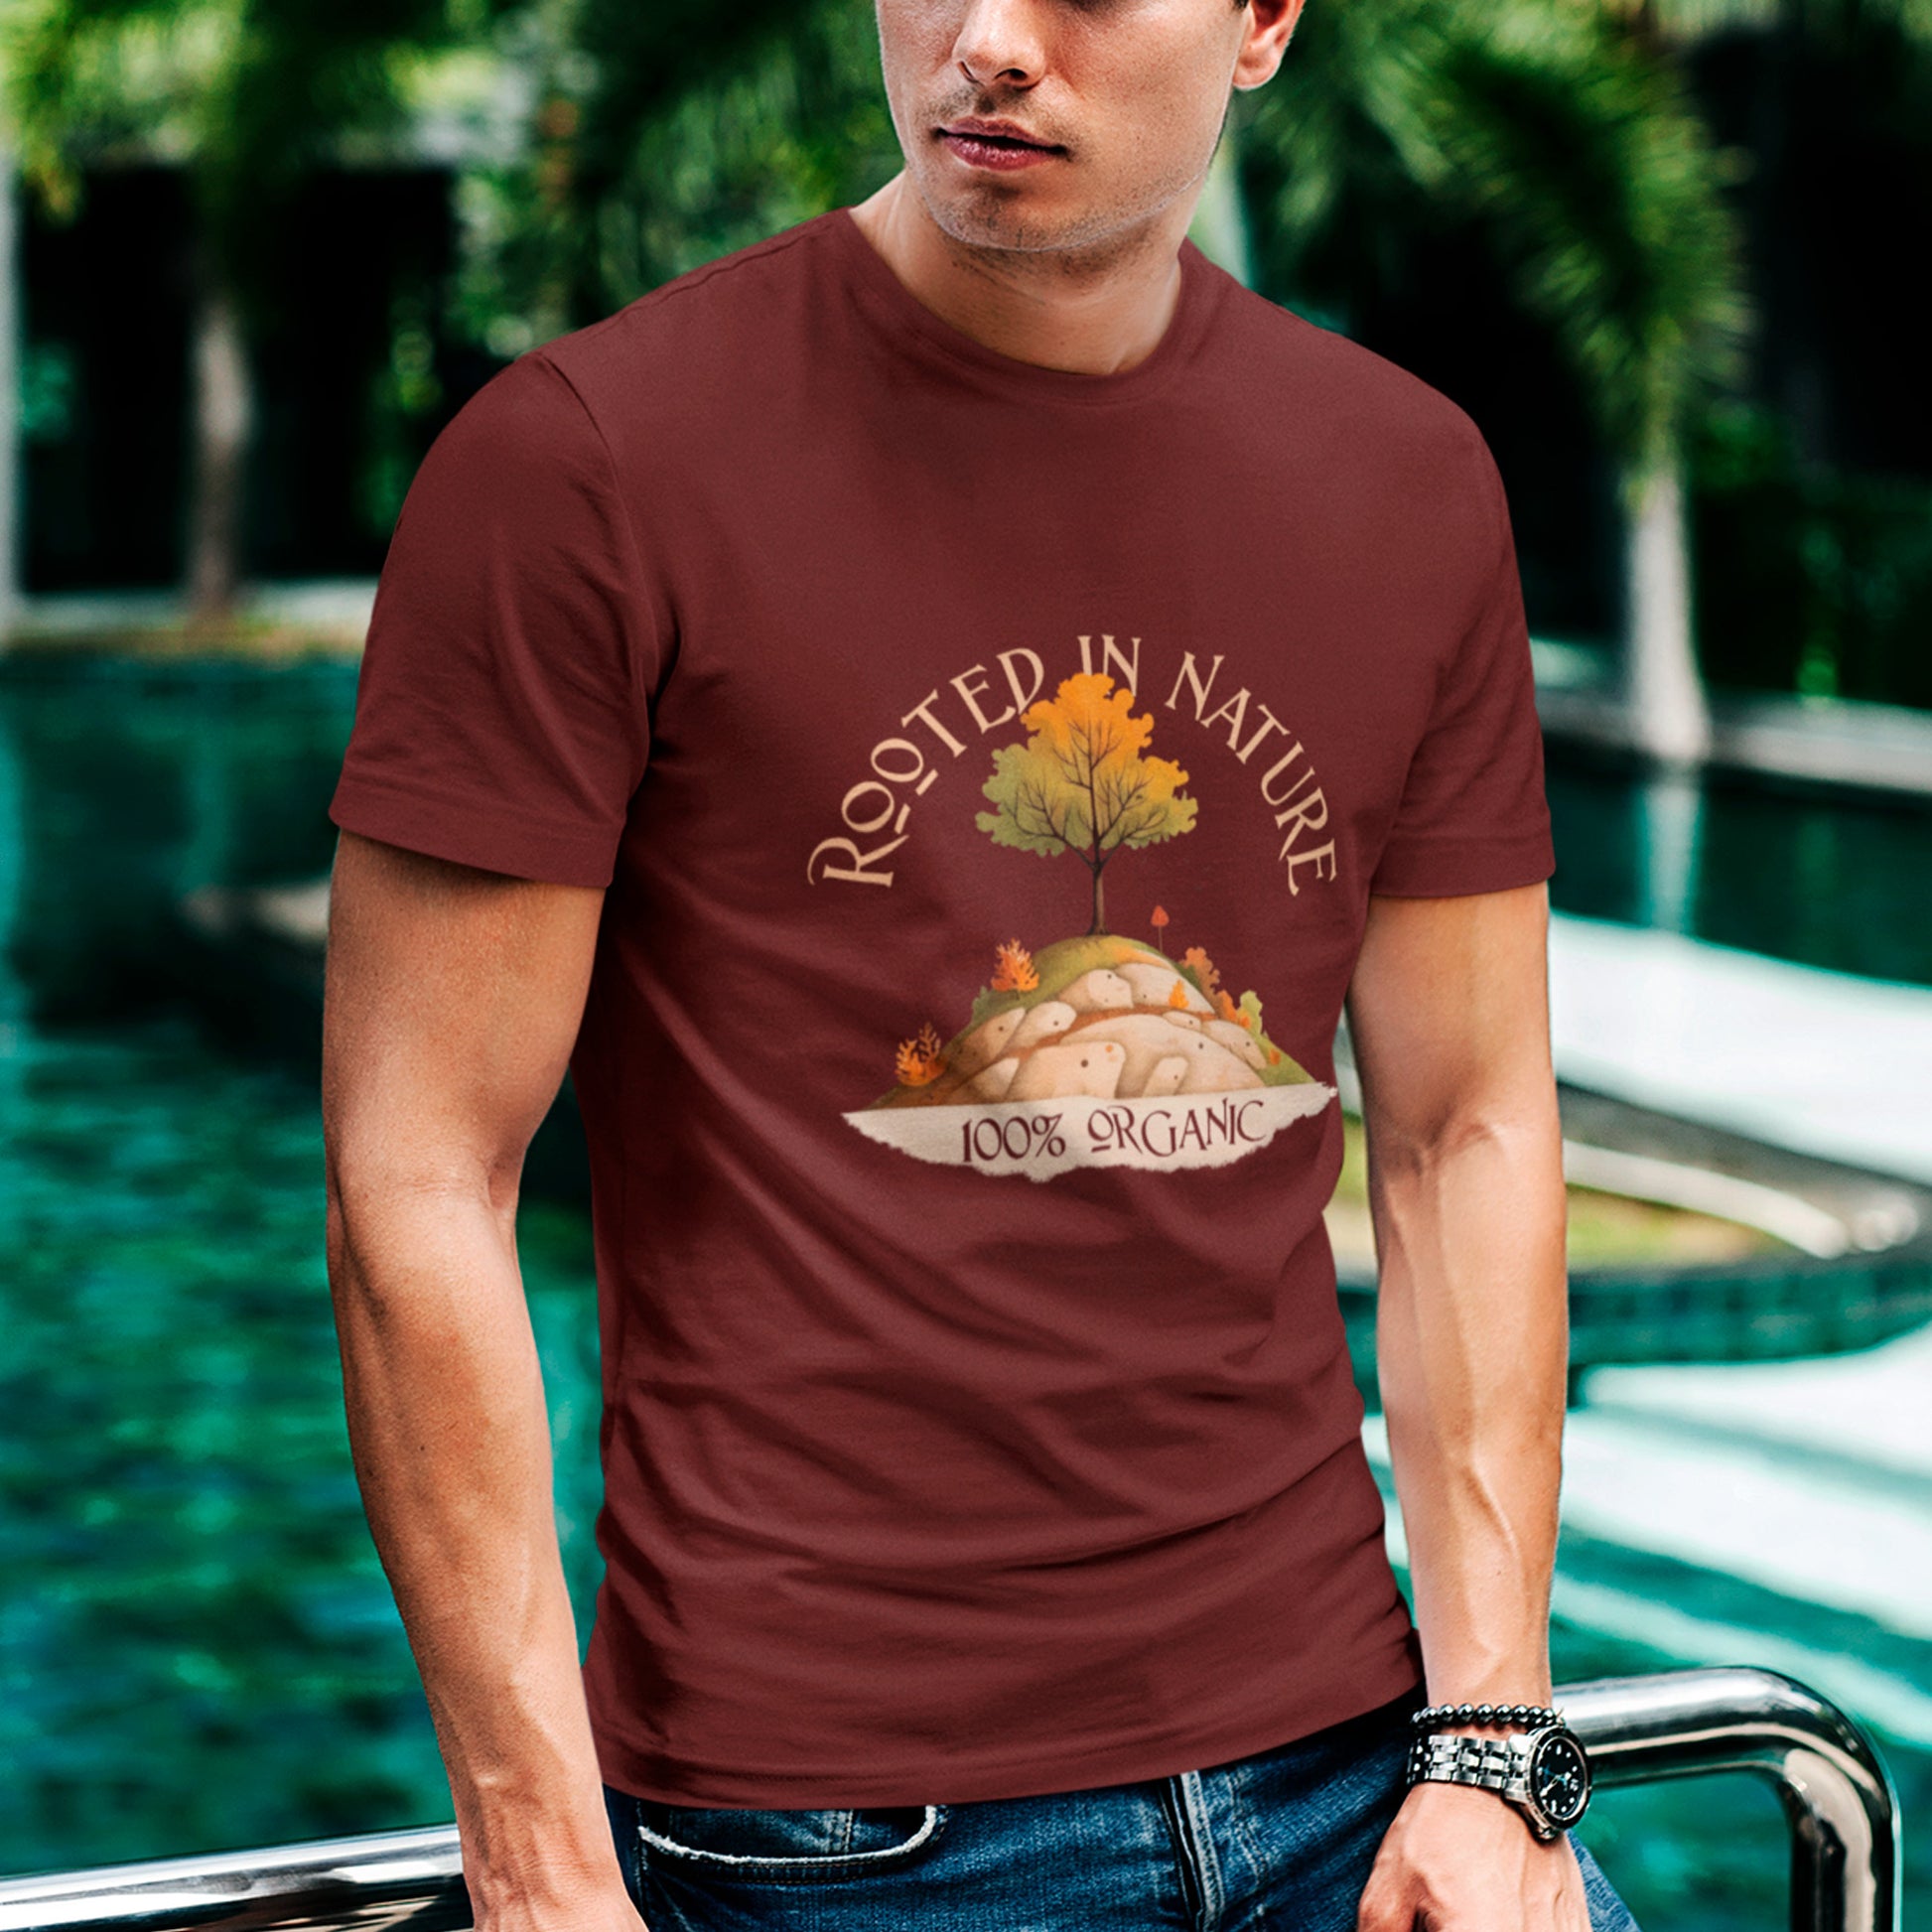 Male model wearing Rooted in Nature Unisex organic cotton t-shirt- in burgundy